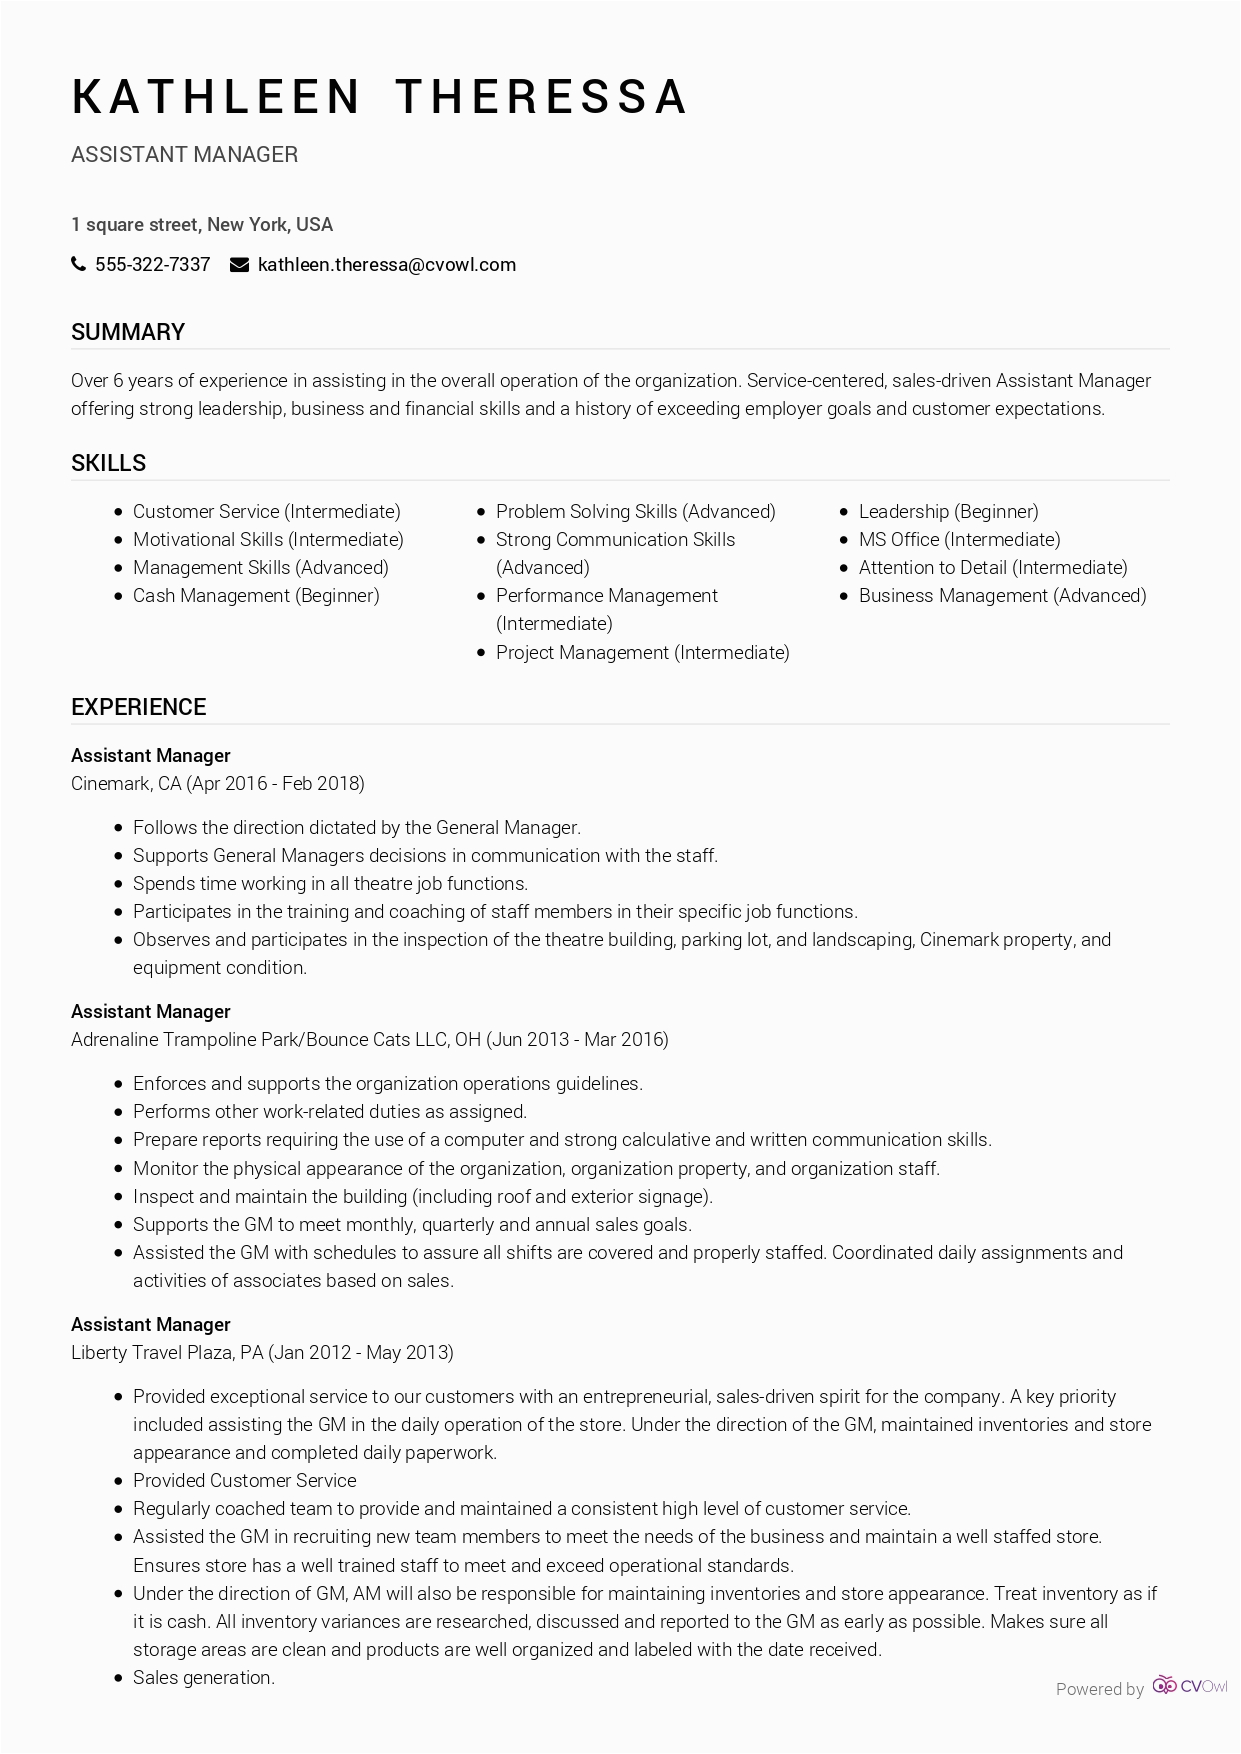 Office assistant Resume Sample In India assistant Manager Resume Sample